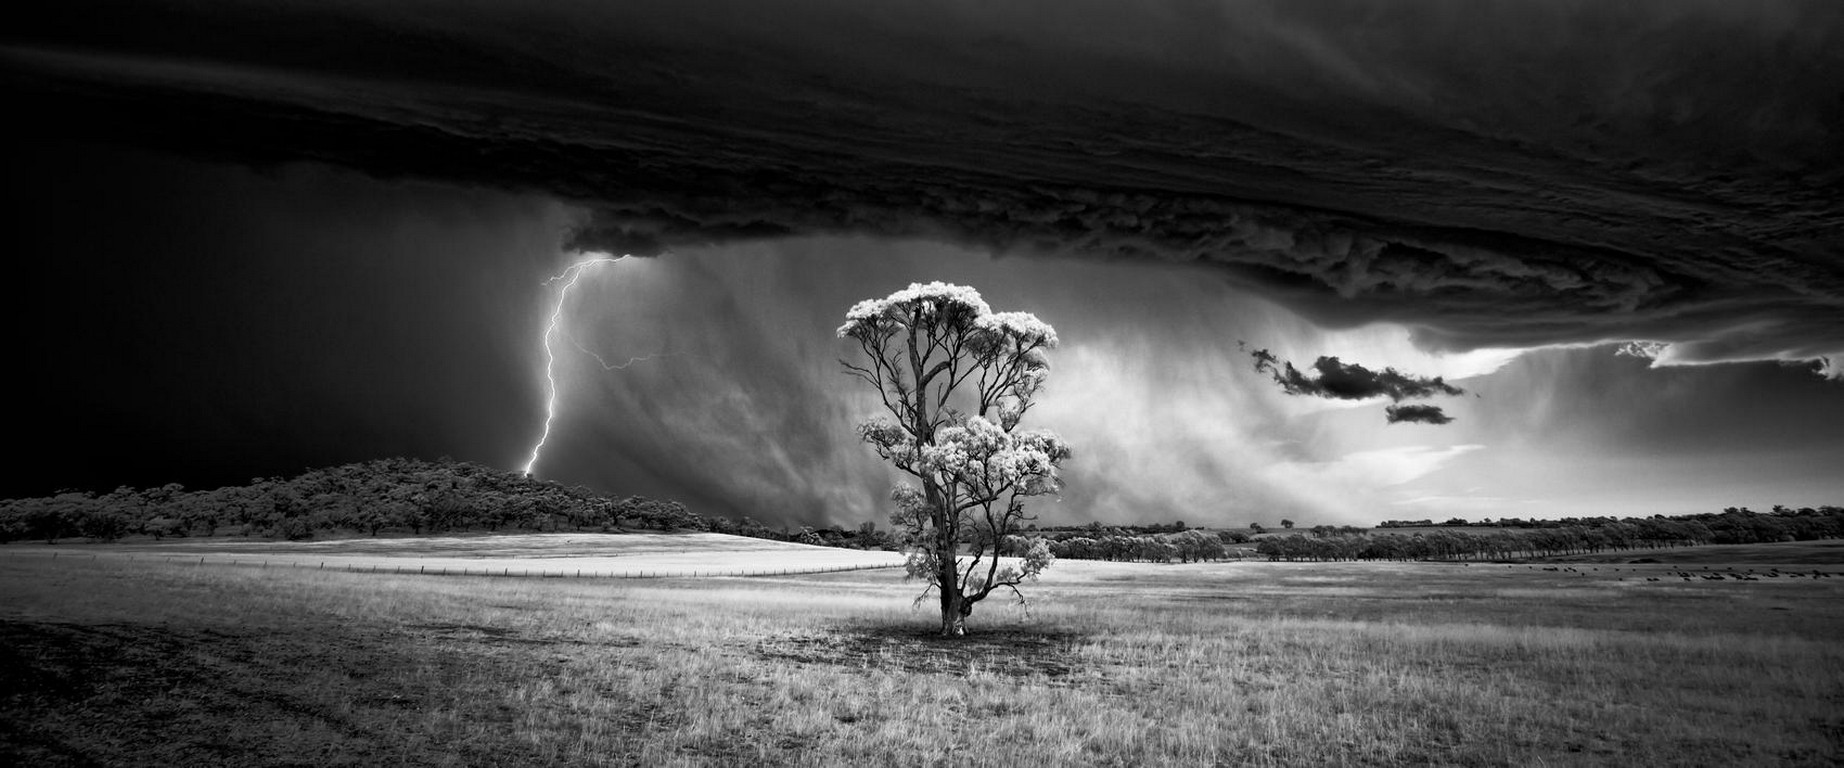 Nature Landscape Trees Field Storm Lightning Supercell Nature Clouds Hills Wind Monochrome Panoramas 1844x768